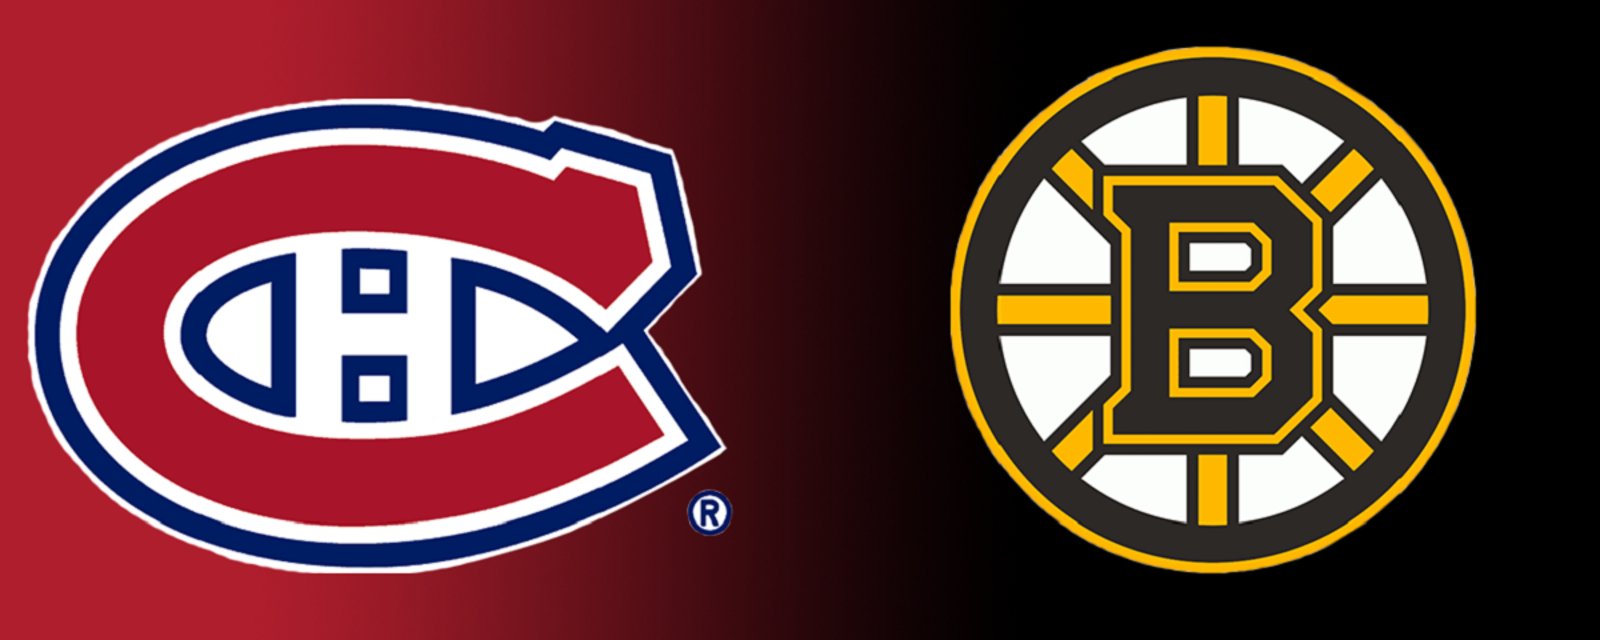 Full lineups for Saturday's clash between Bruins and Habs.